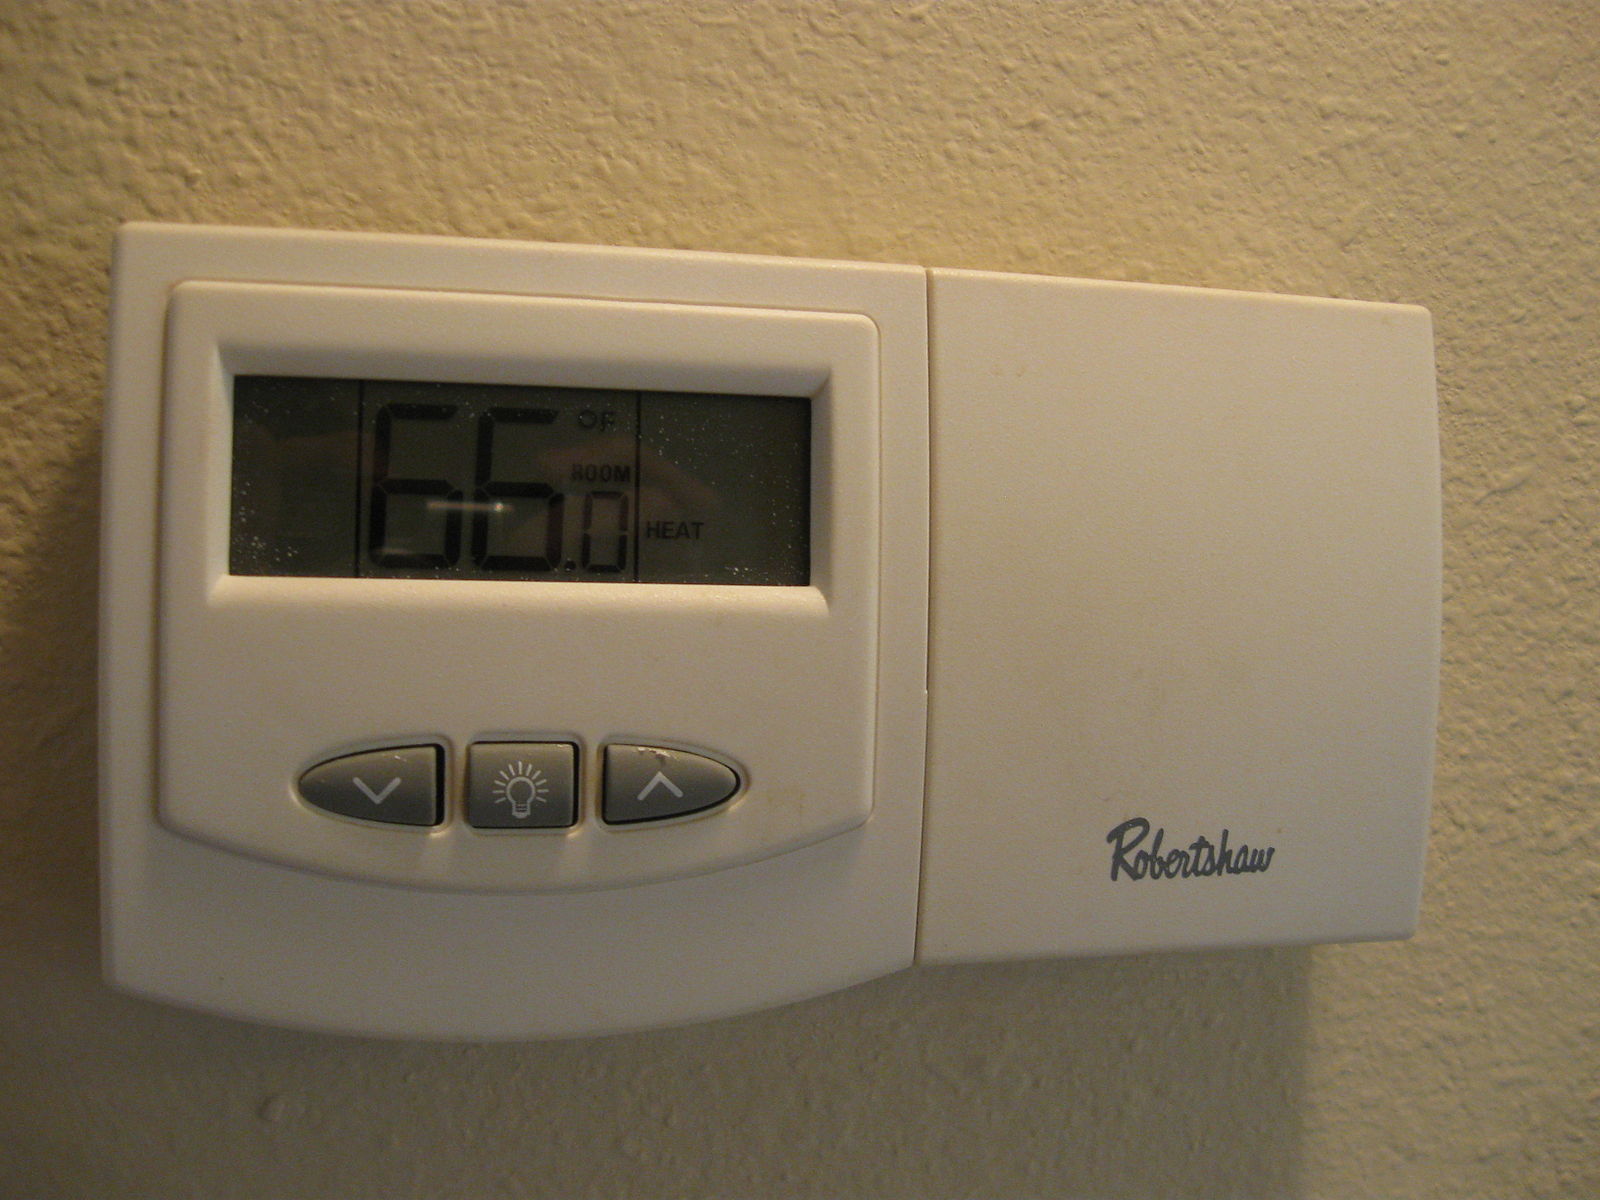 relocate thermostat without wires